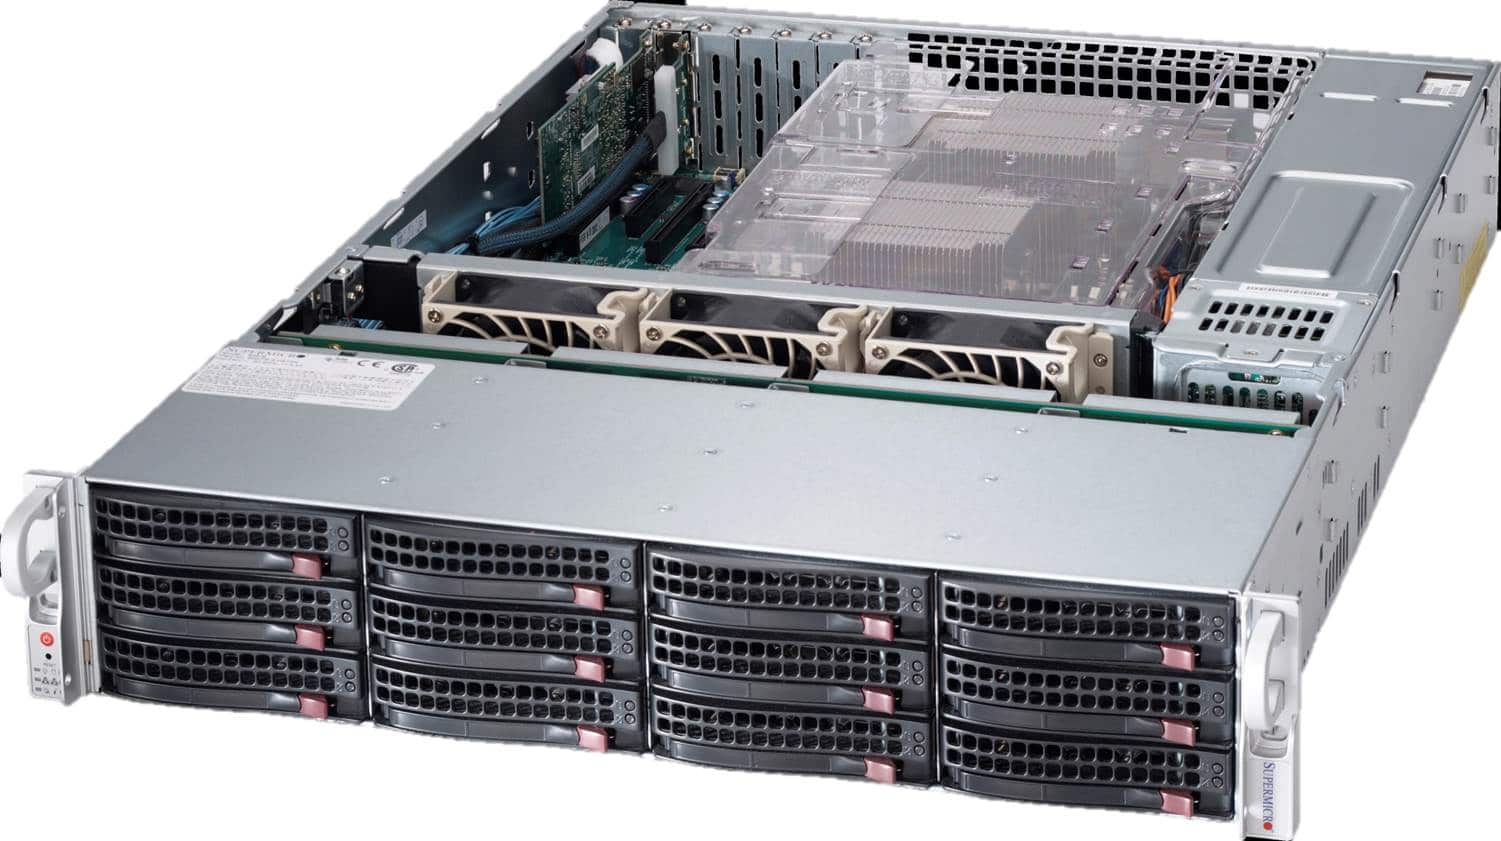 Supermicro 1U TwinPro SYS-1028TP-DTTR